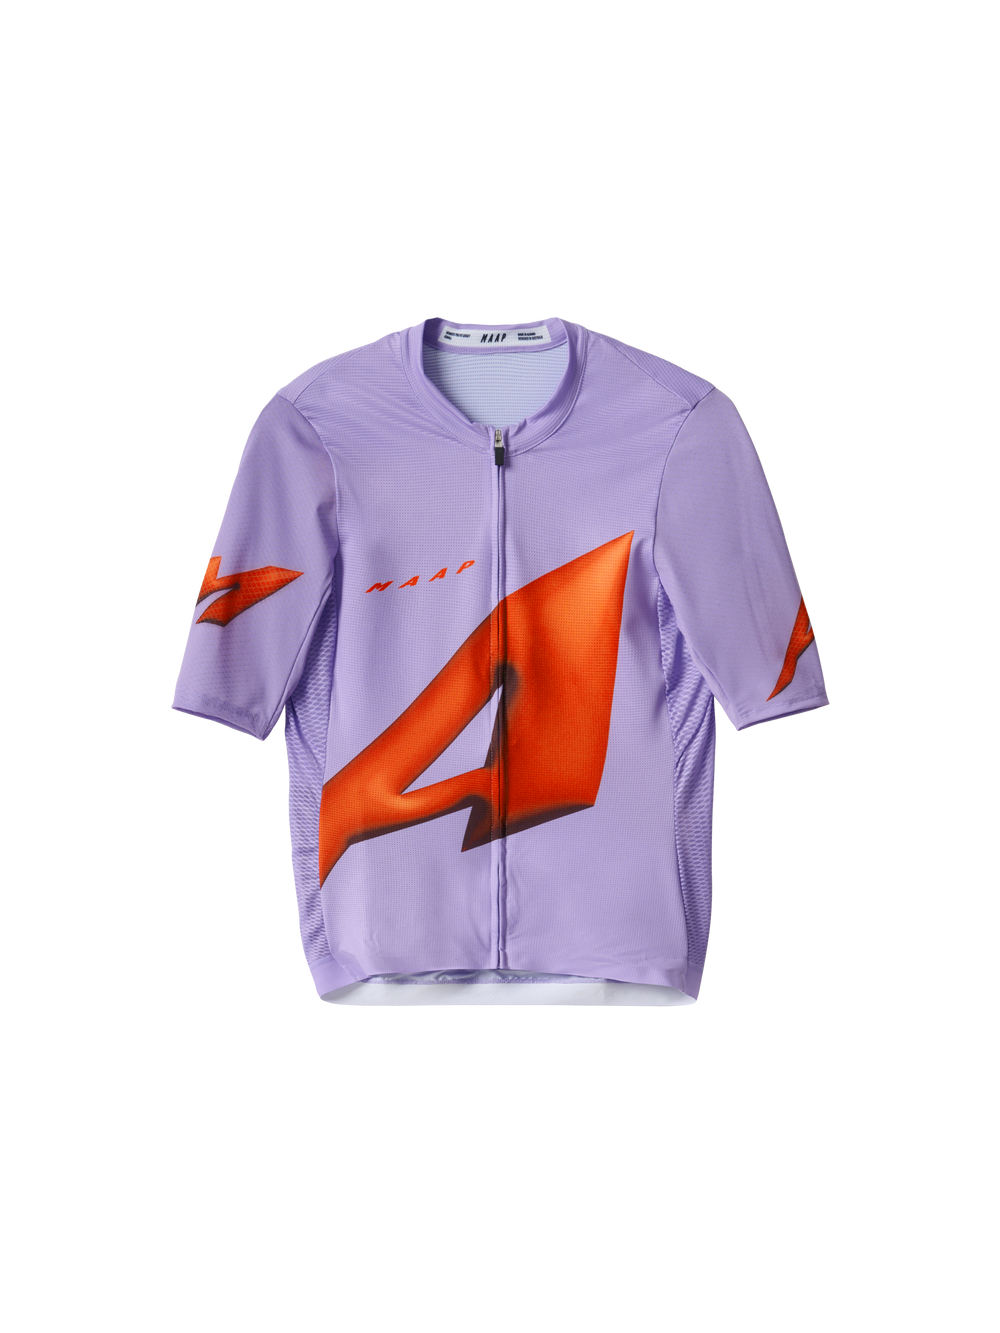 Product Image for Women's Orbit Pro Air Jersey